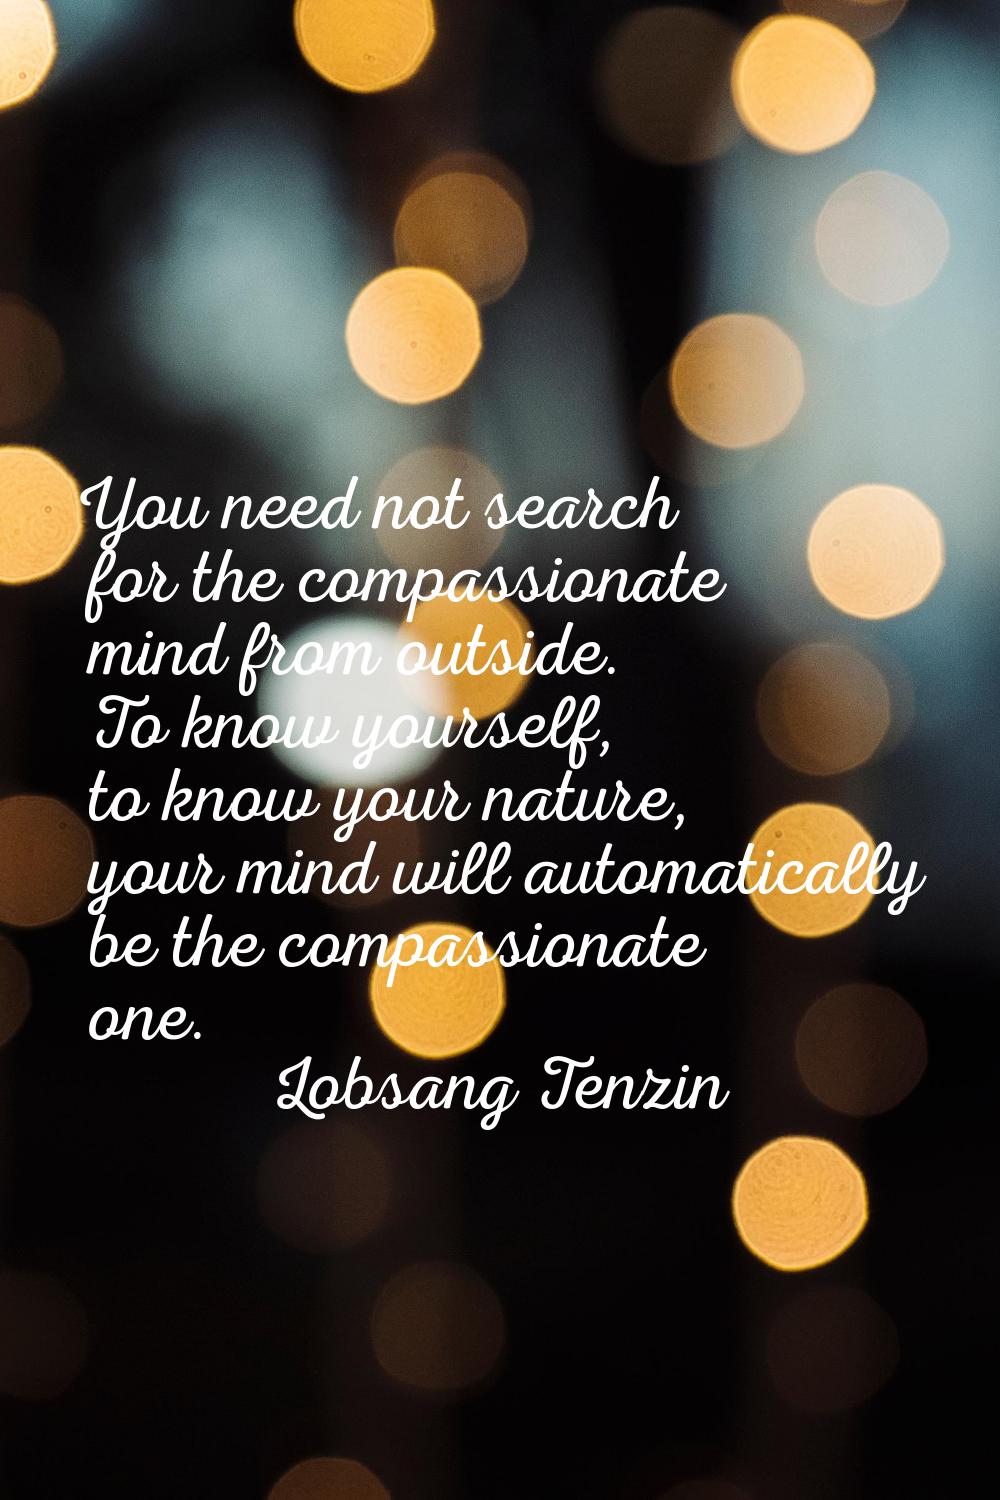 You need not search for the compassionate mind from outside. To know yourself, to know your nature,